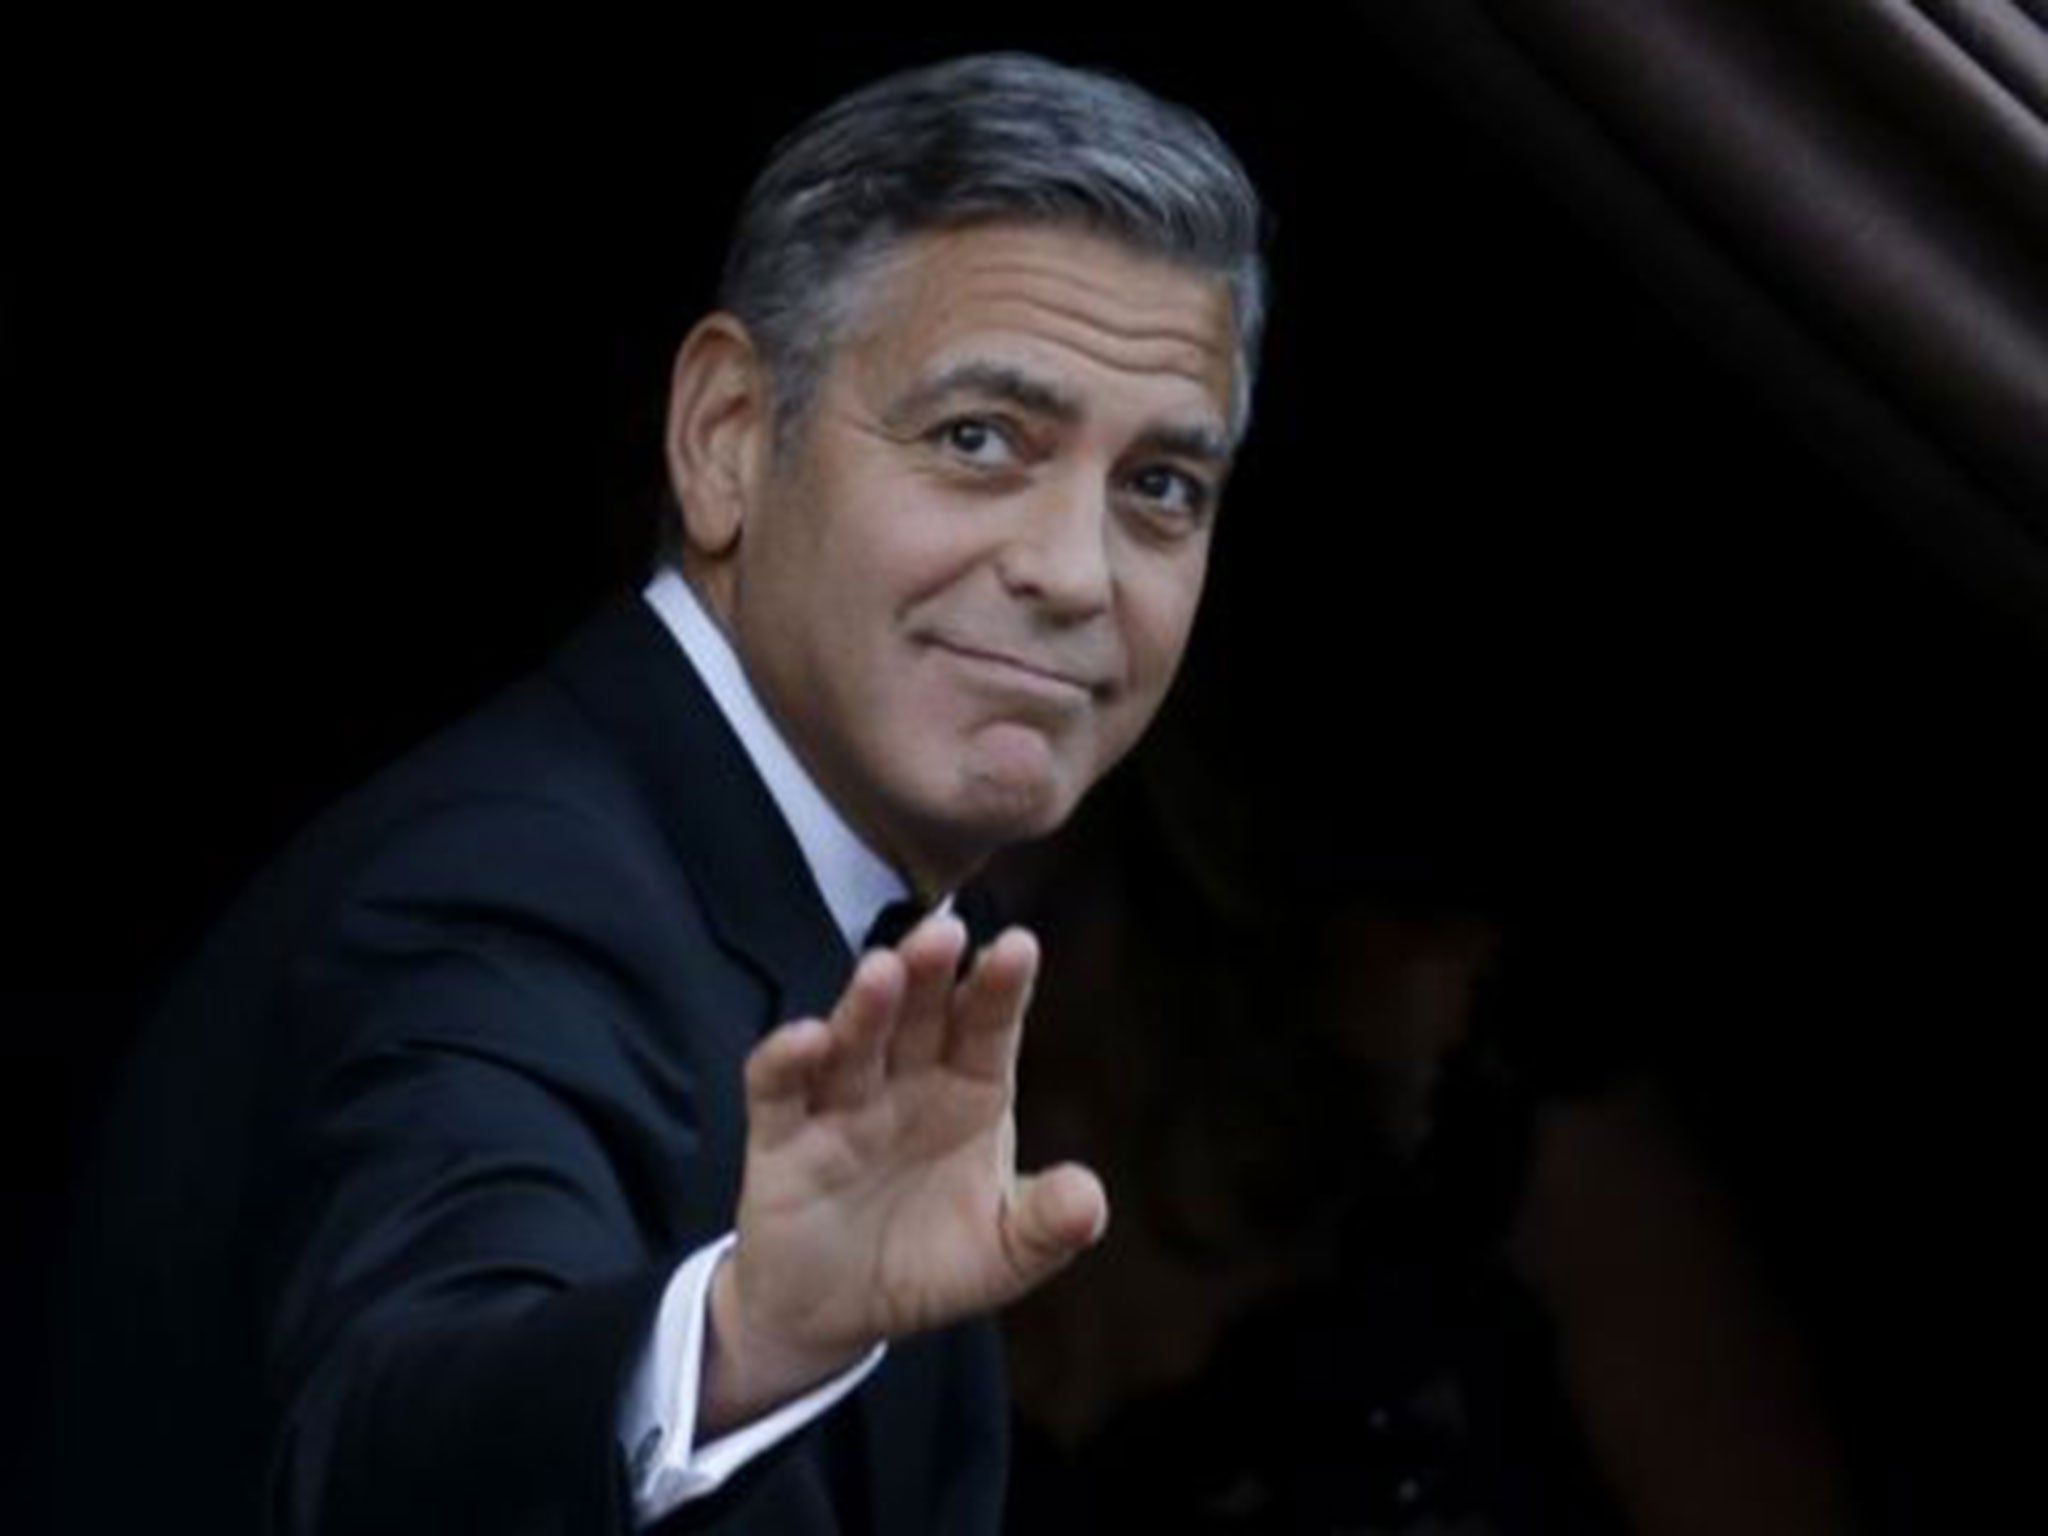 Clooney said the hysteria surrounding the billionaire property mogul would eventually die down